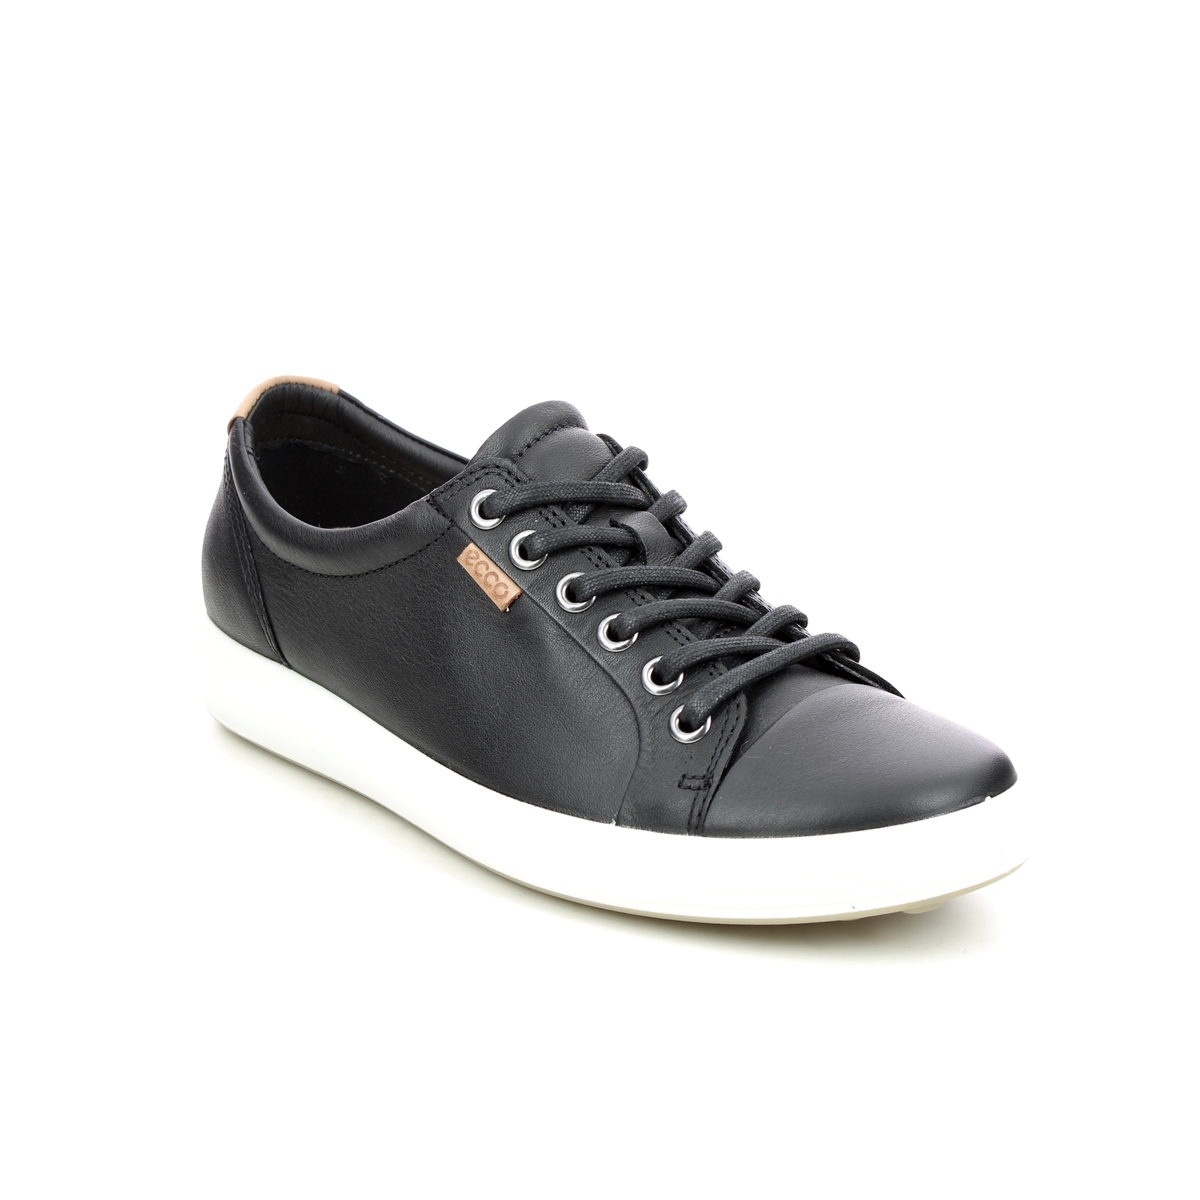 Ecco Soft 7 Lace Black Leather Womens Trainers 430003-01001 In Size 42 In Plain Black Leather